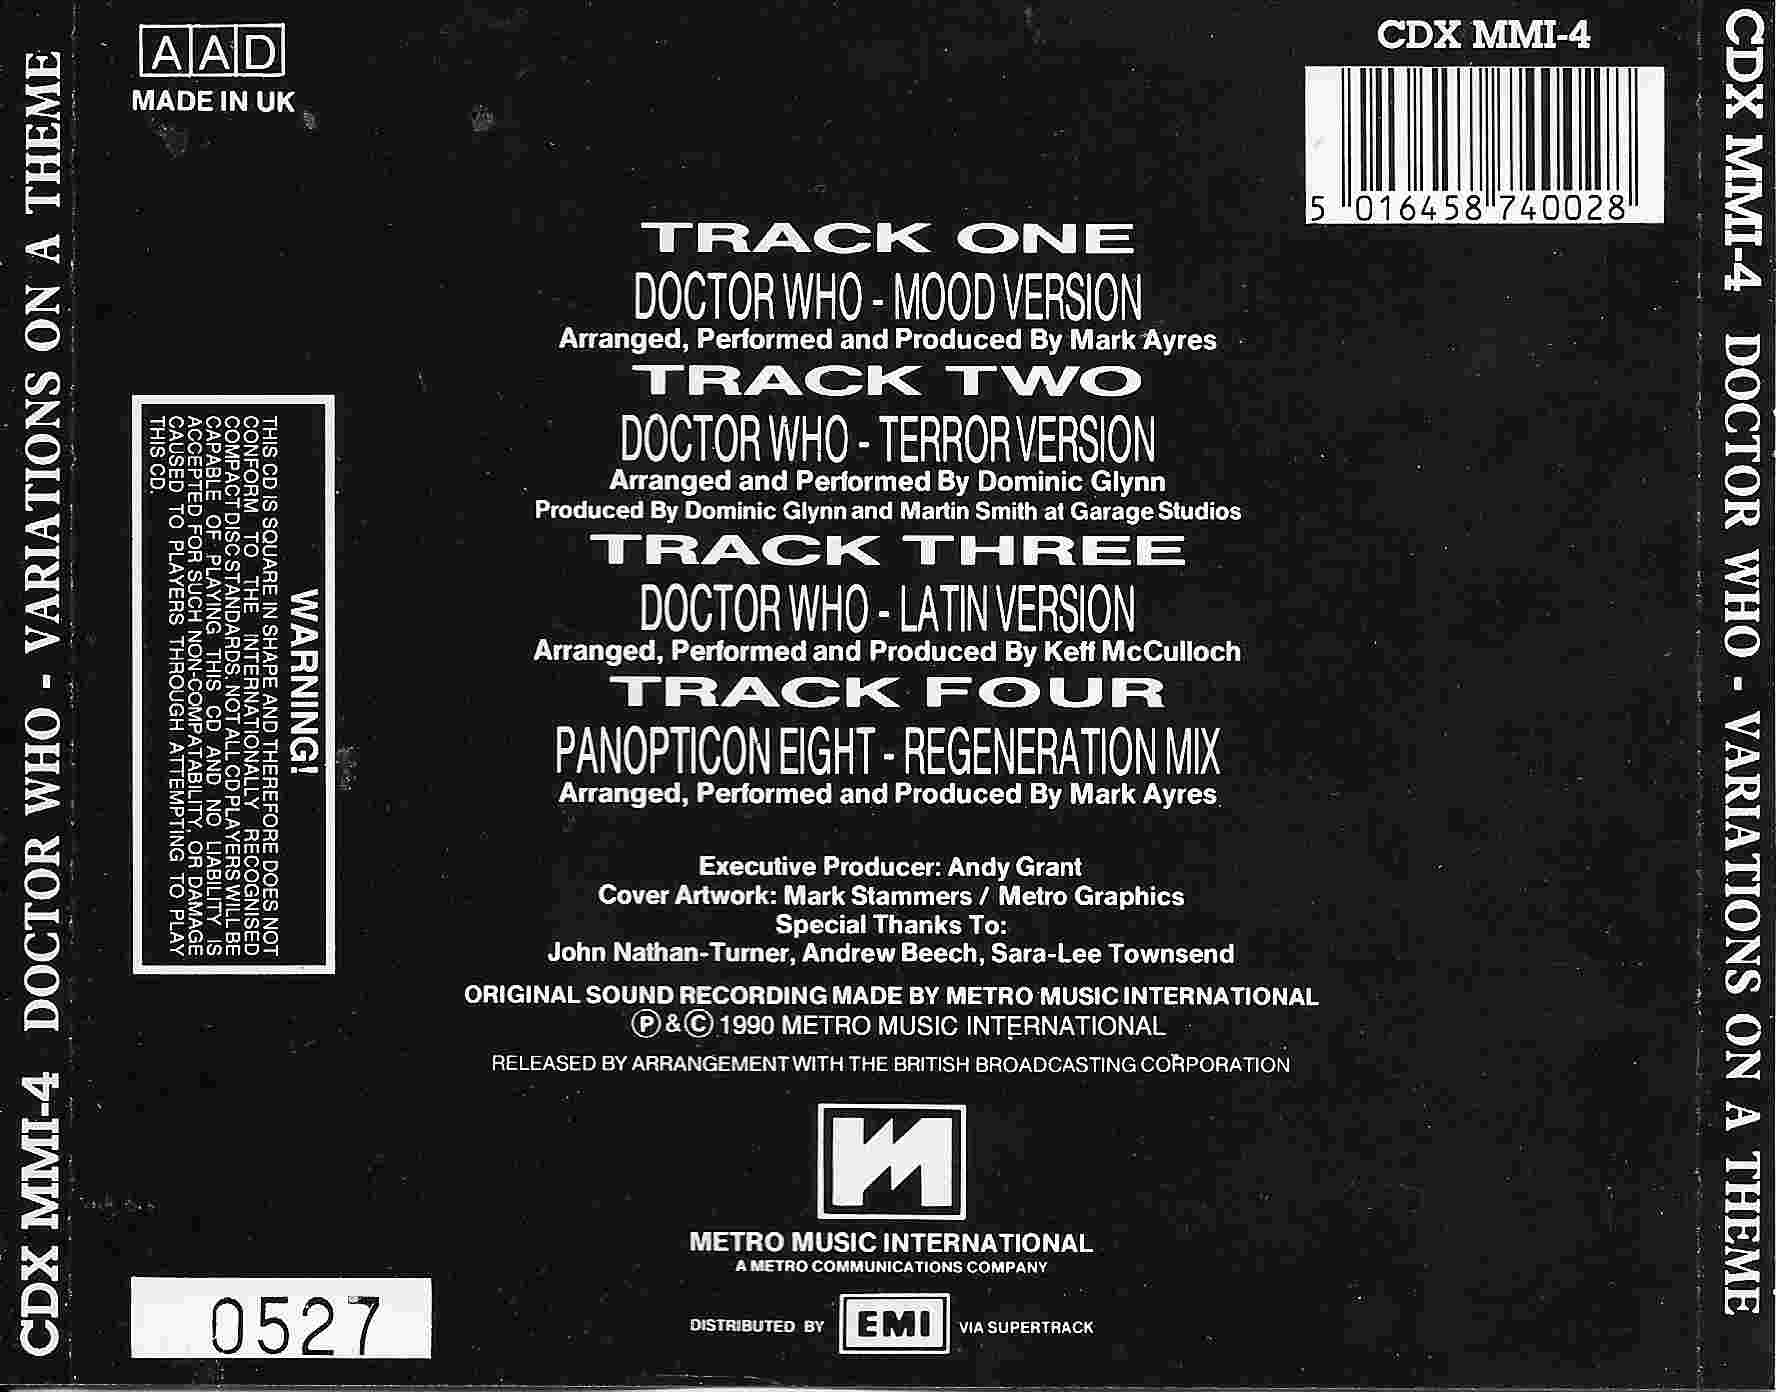 Back cover of CDX MMI - 4